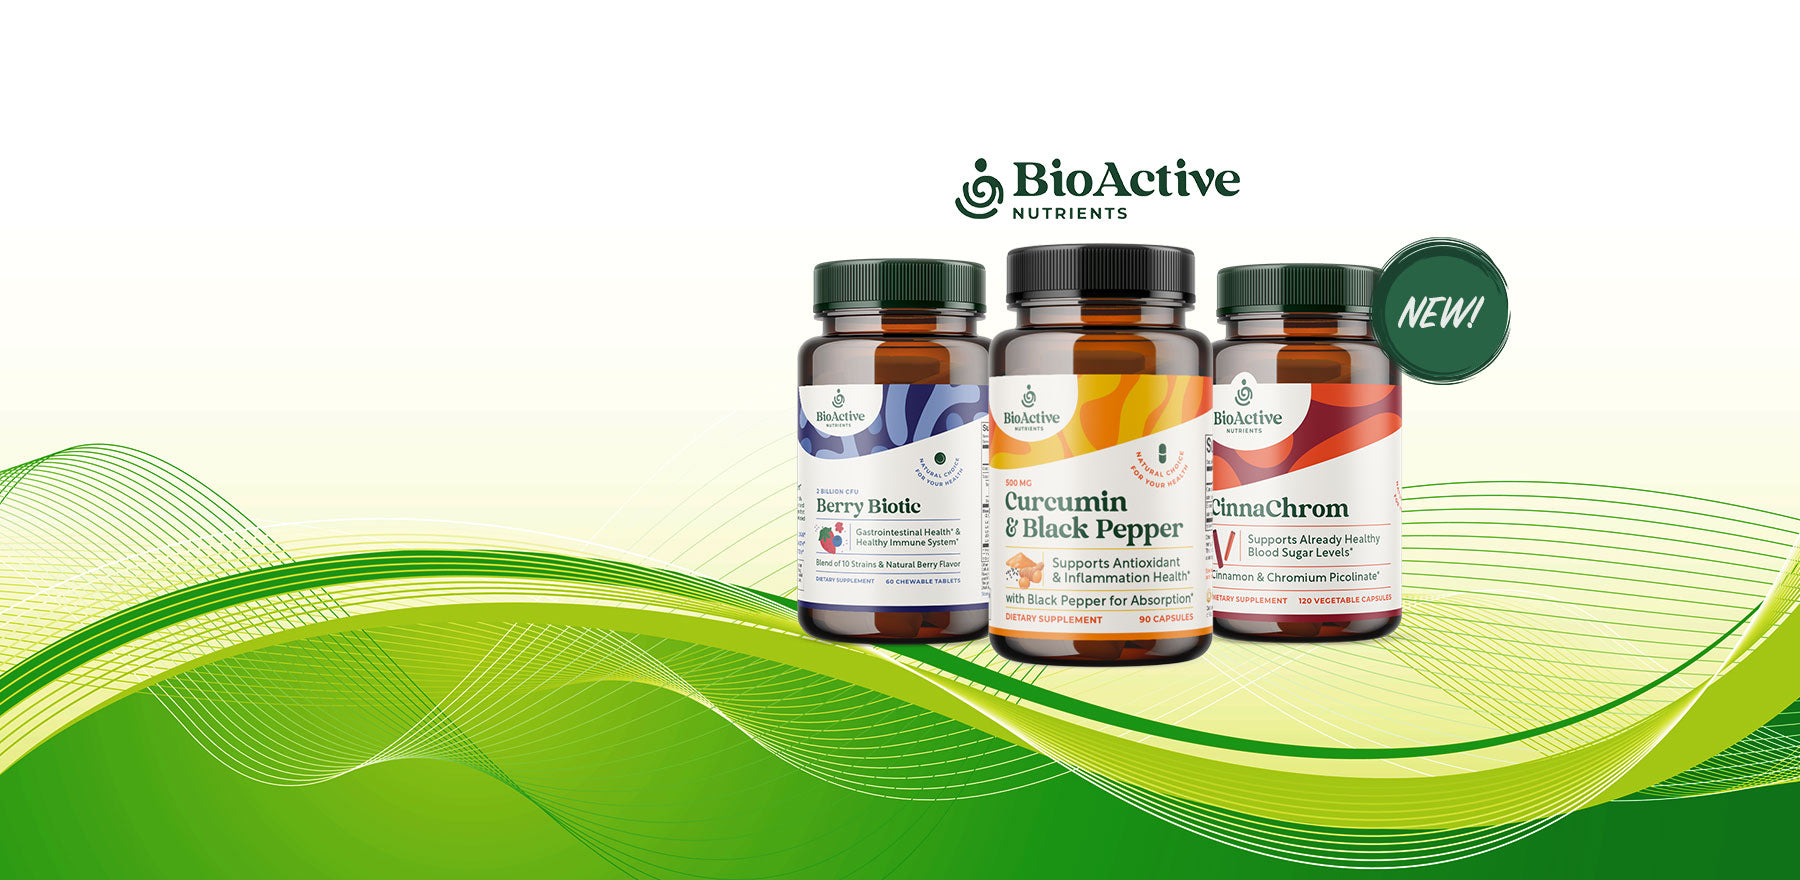 BioActive Nutrients supplements now available!